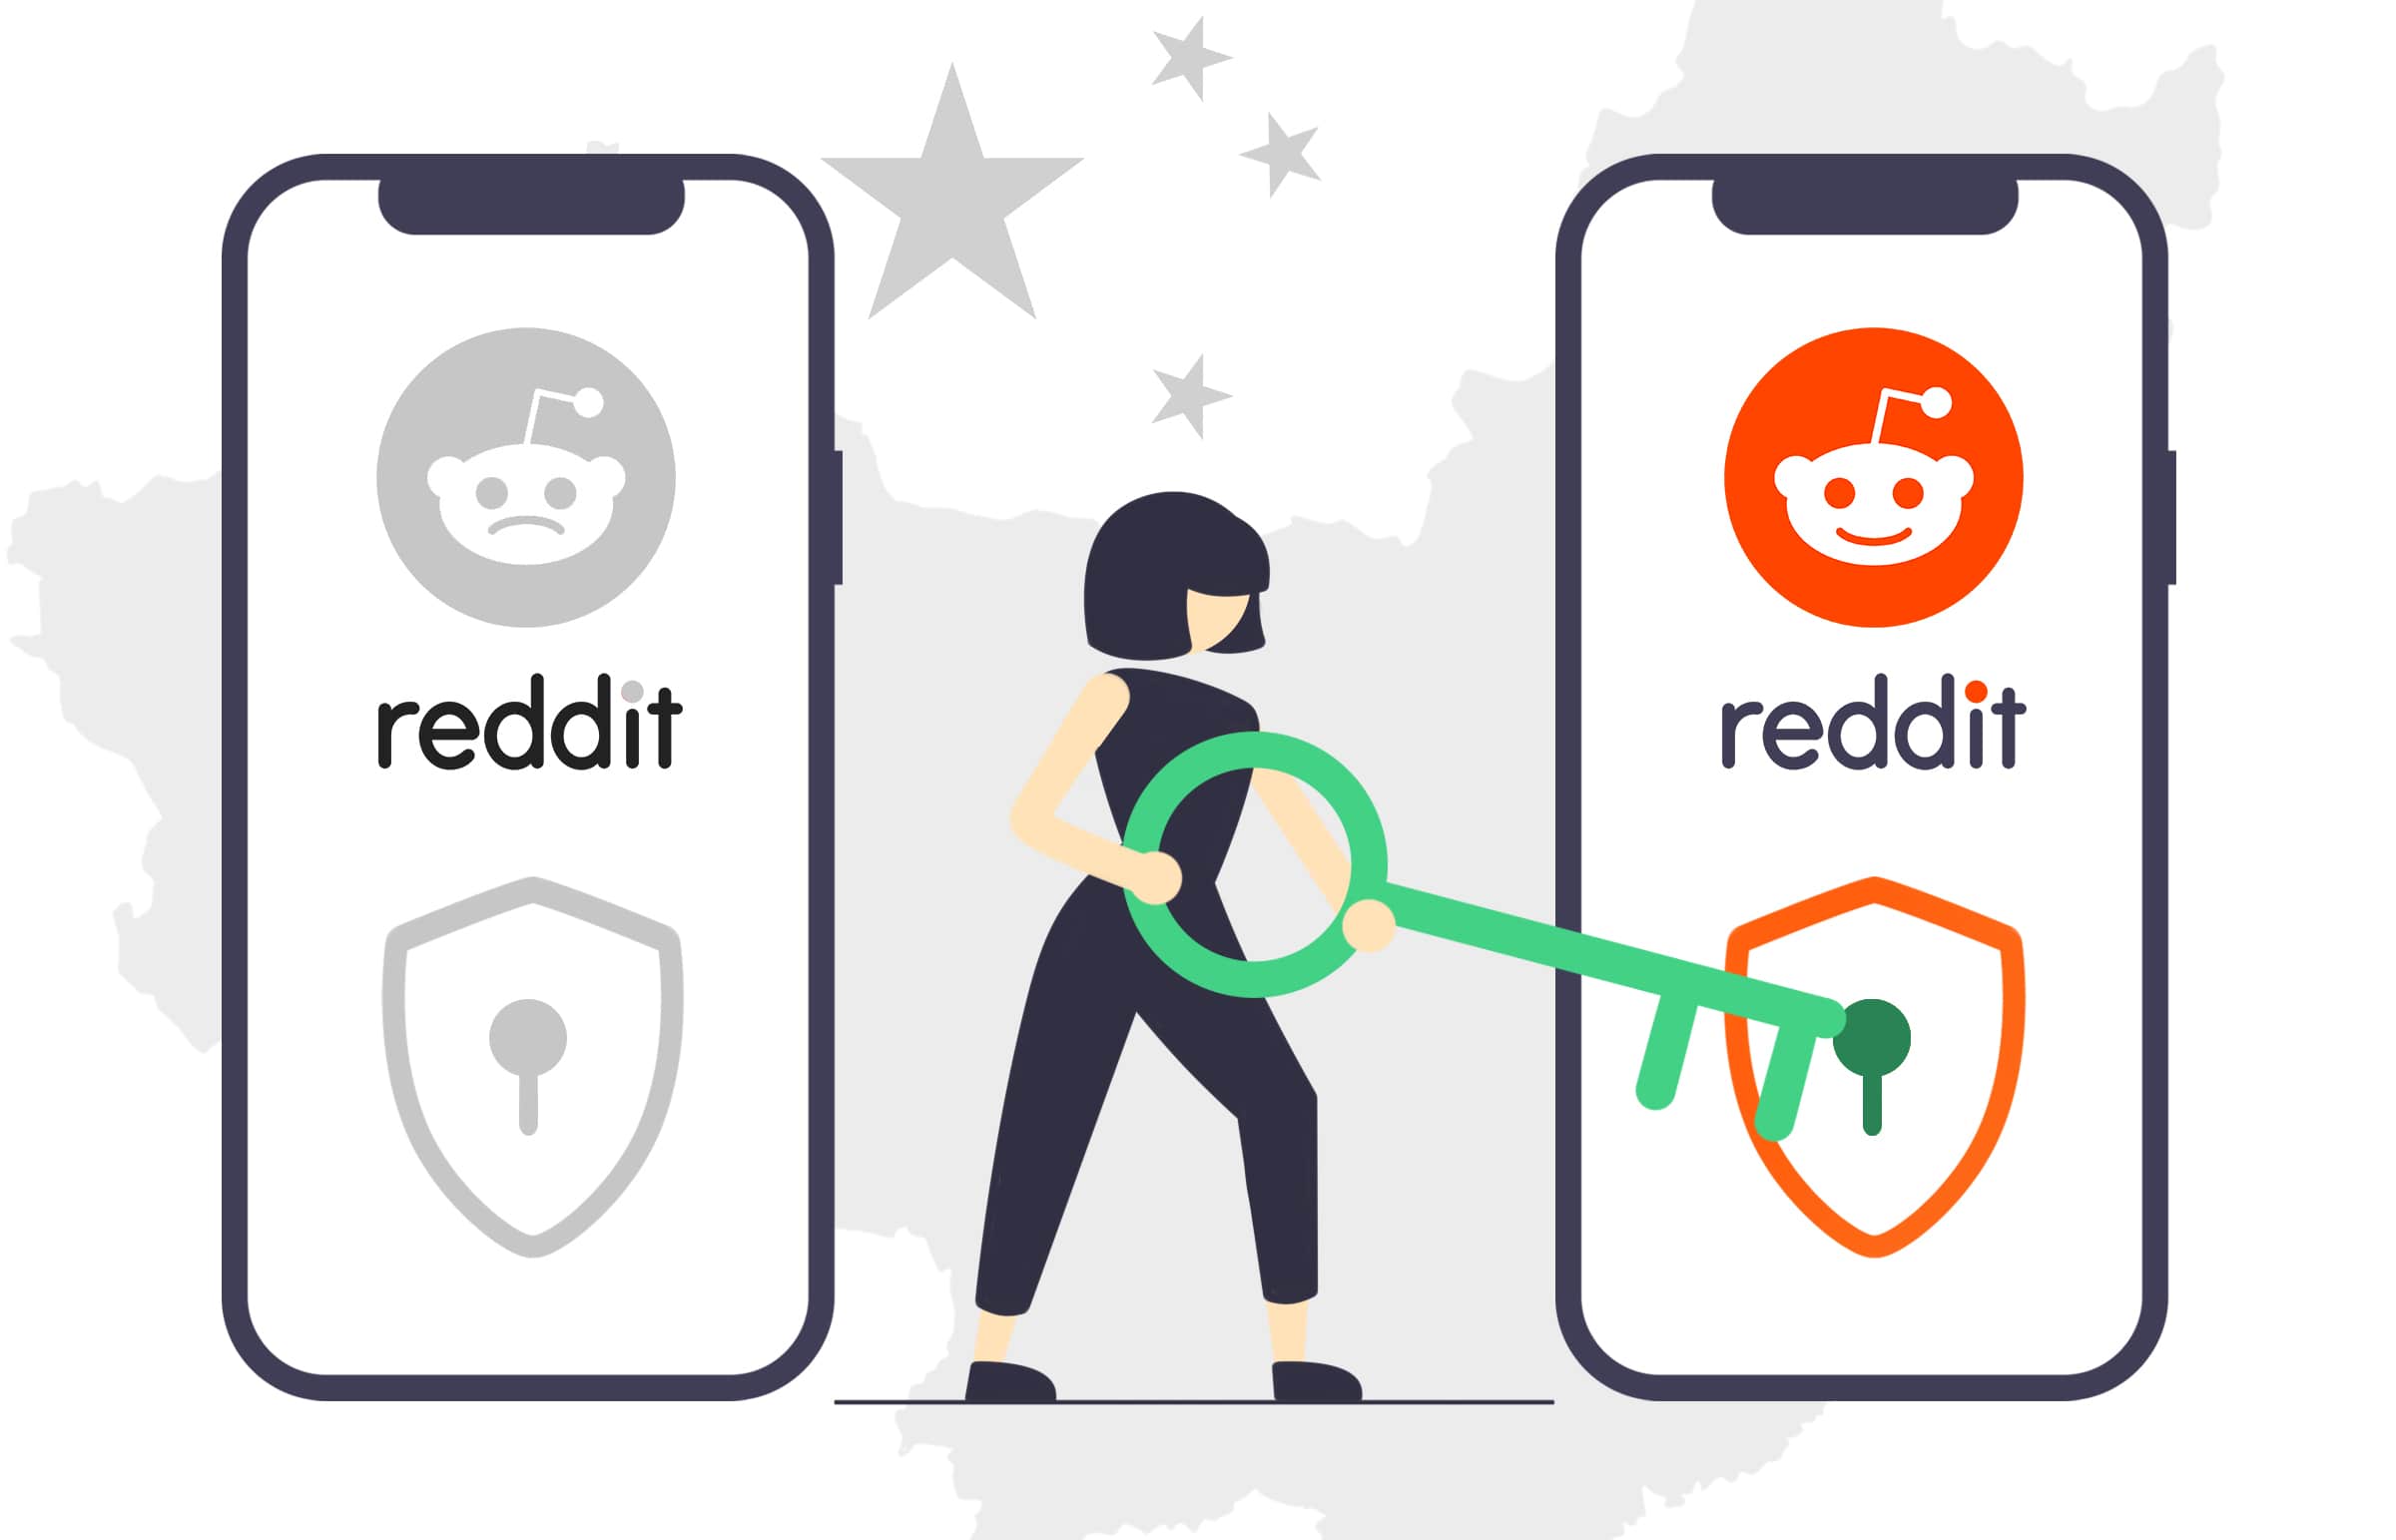 Is Reddit banned in China?